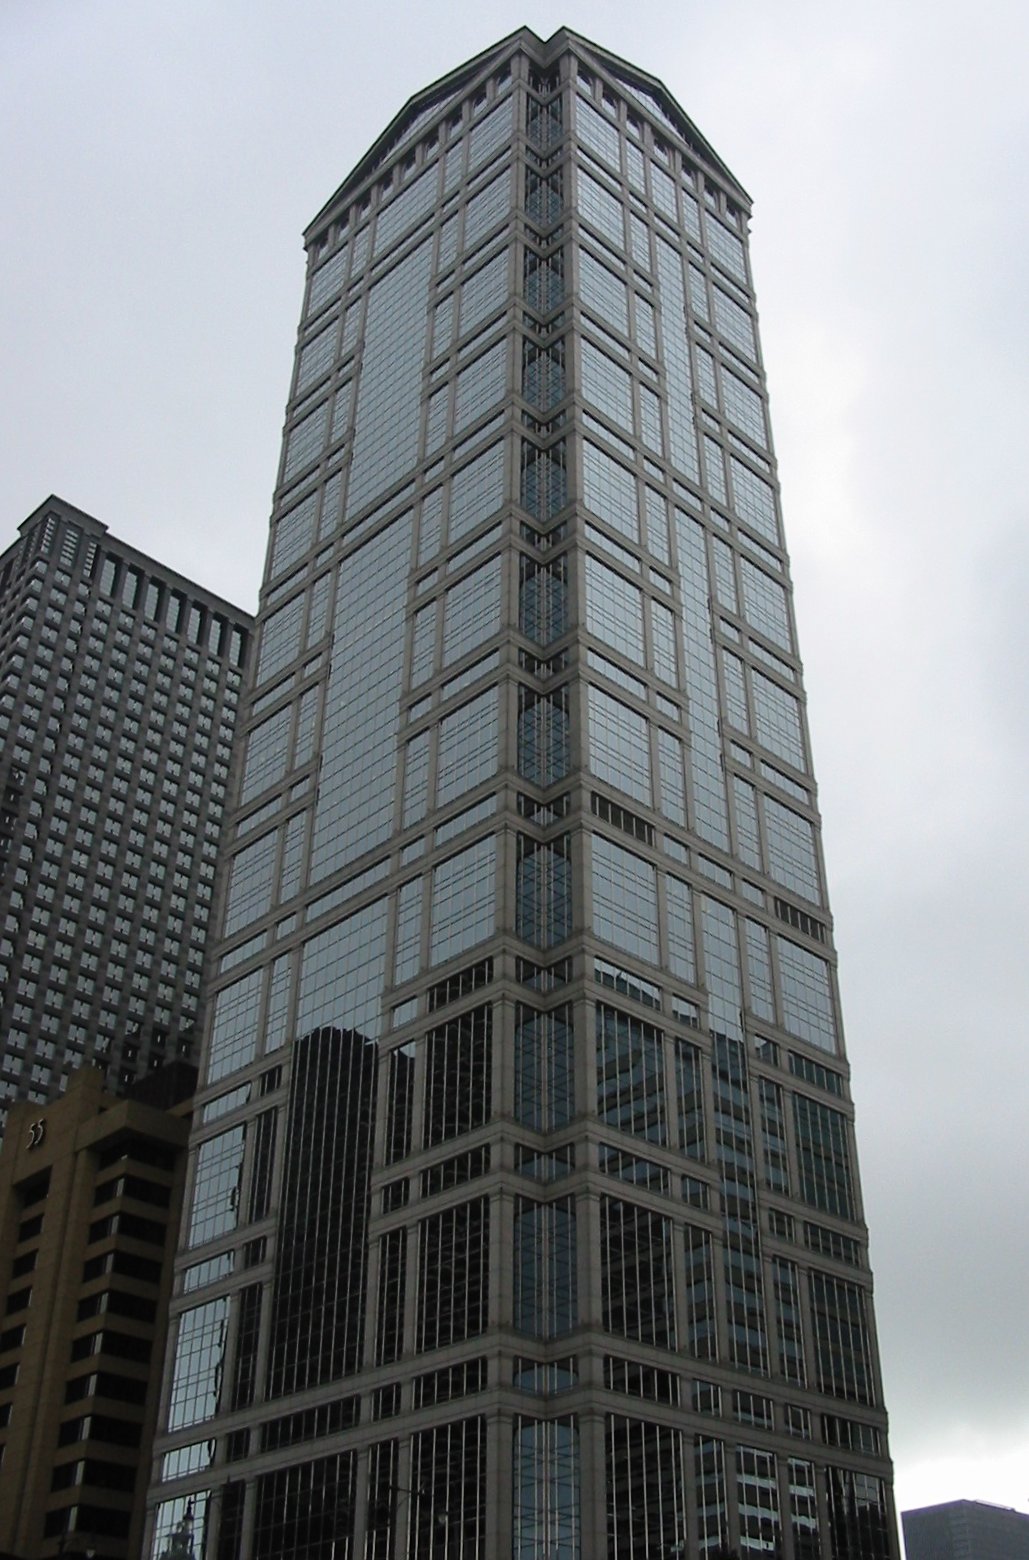 a large tall glass building with many windows on the side